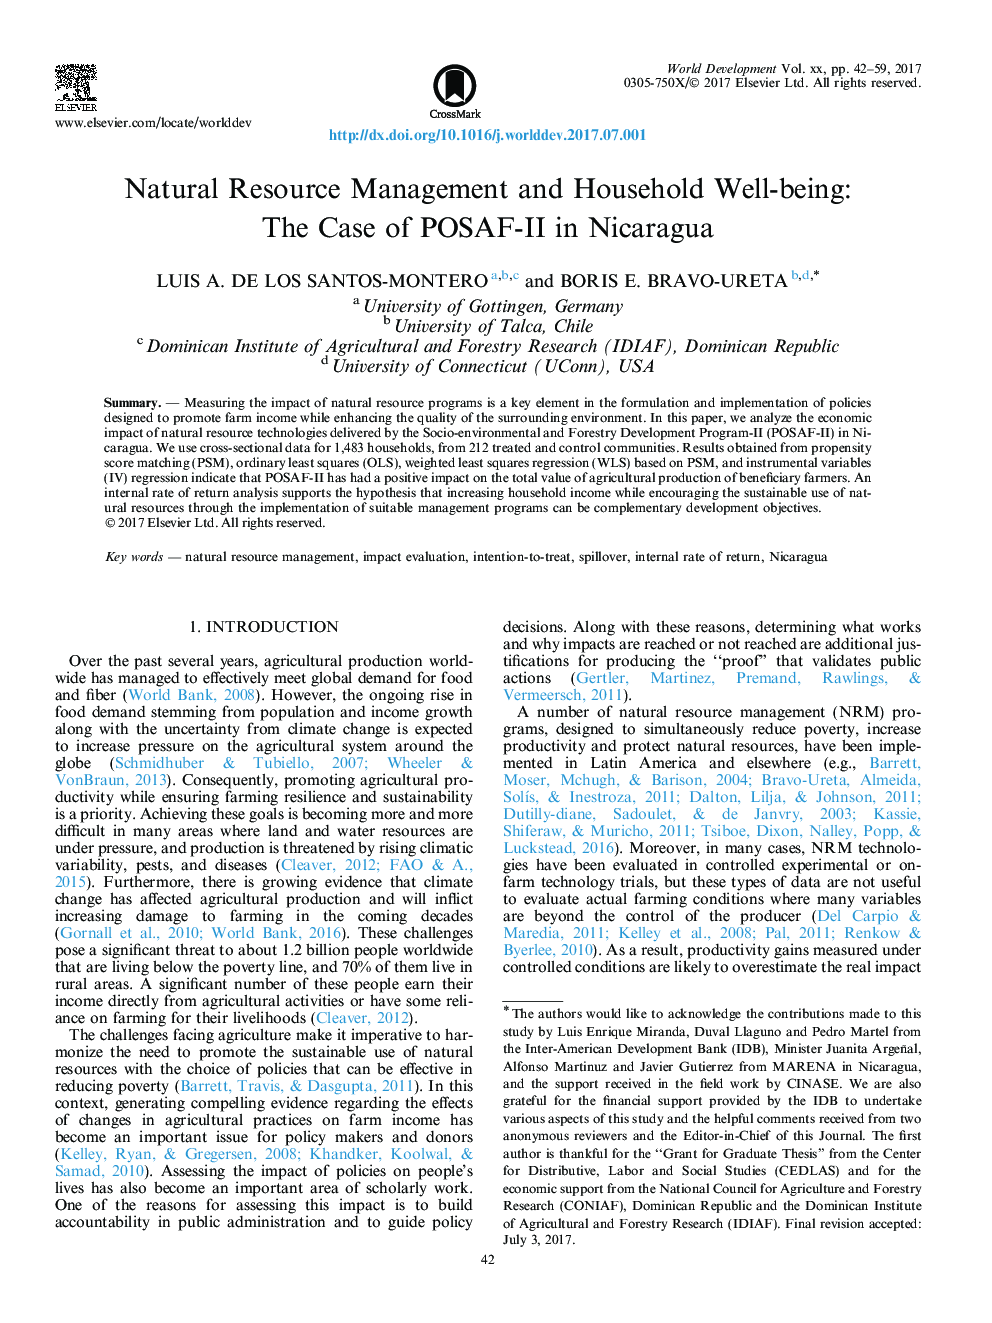 Natural Resource Management and Household Well-being: The Case of POSAF-II in Nicaragua